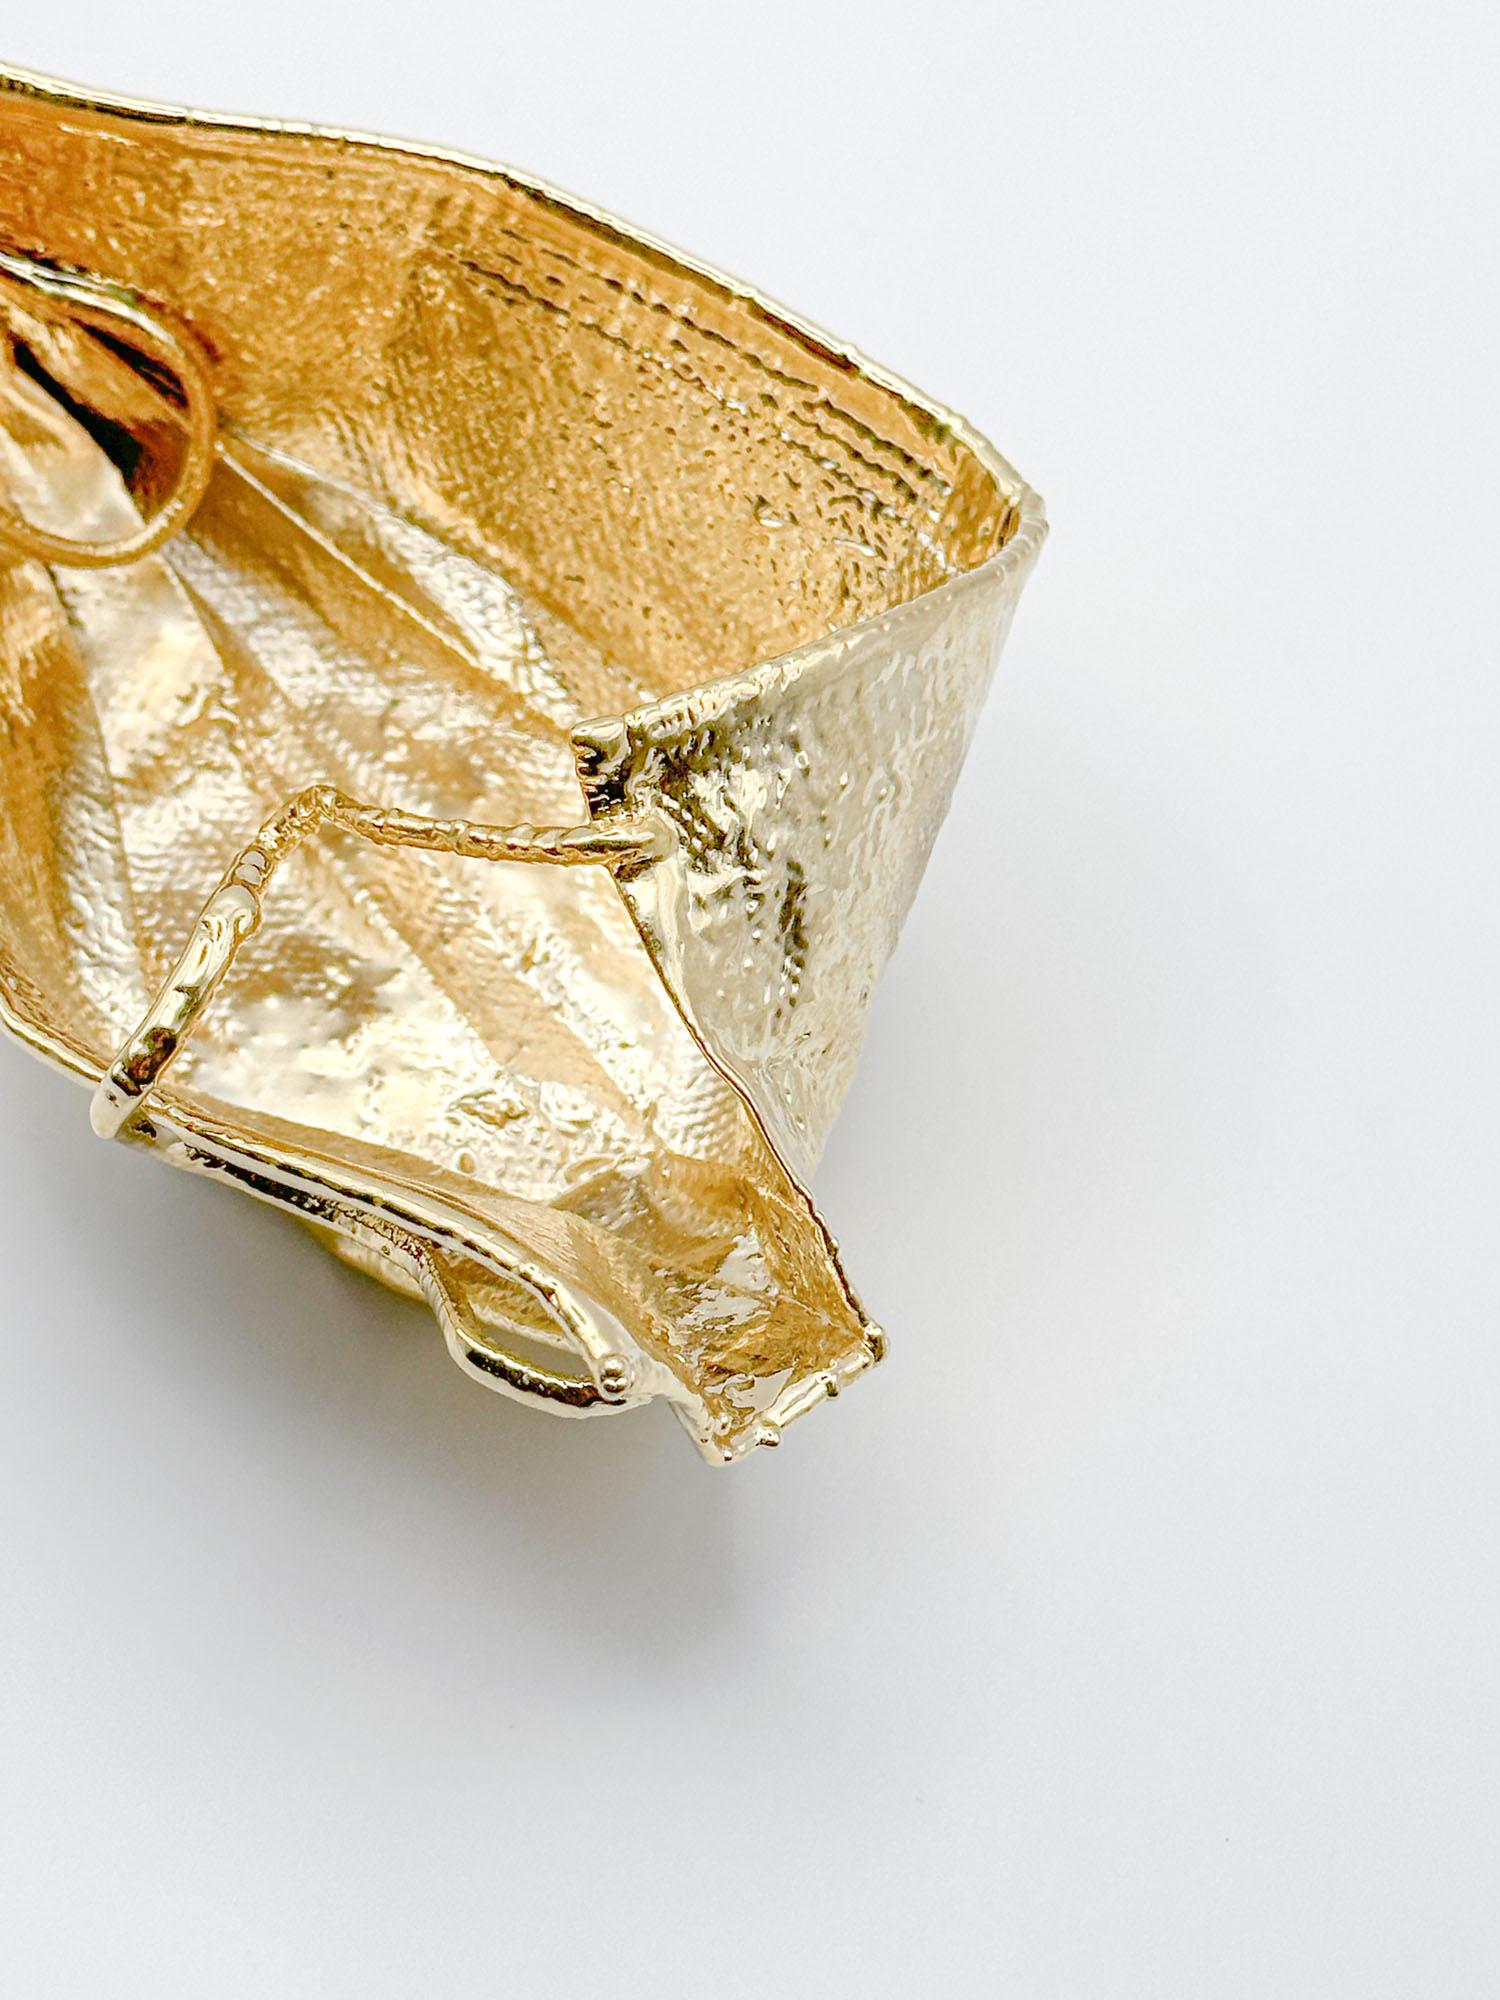 Remask Act 001 Gold Art Objects for Objects for Surgical Mask by Enrico Girotti Neuf - En vente à Verona, IT